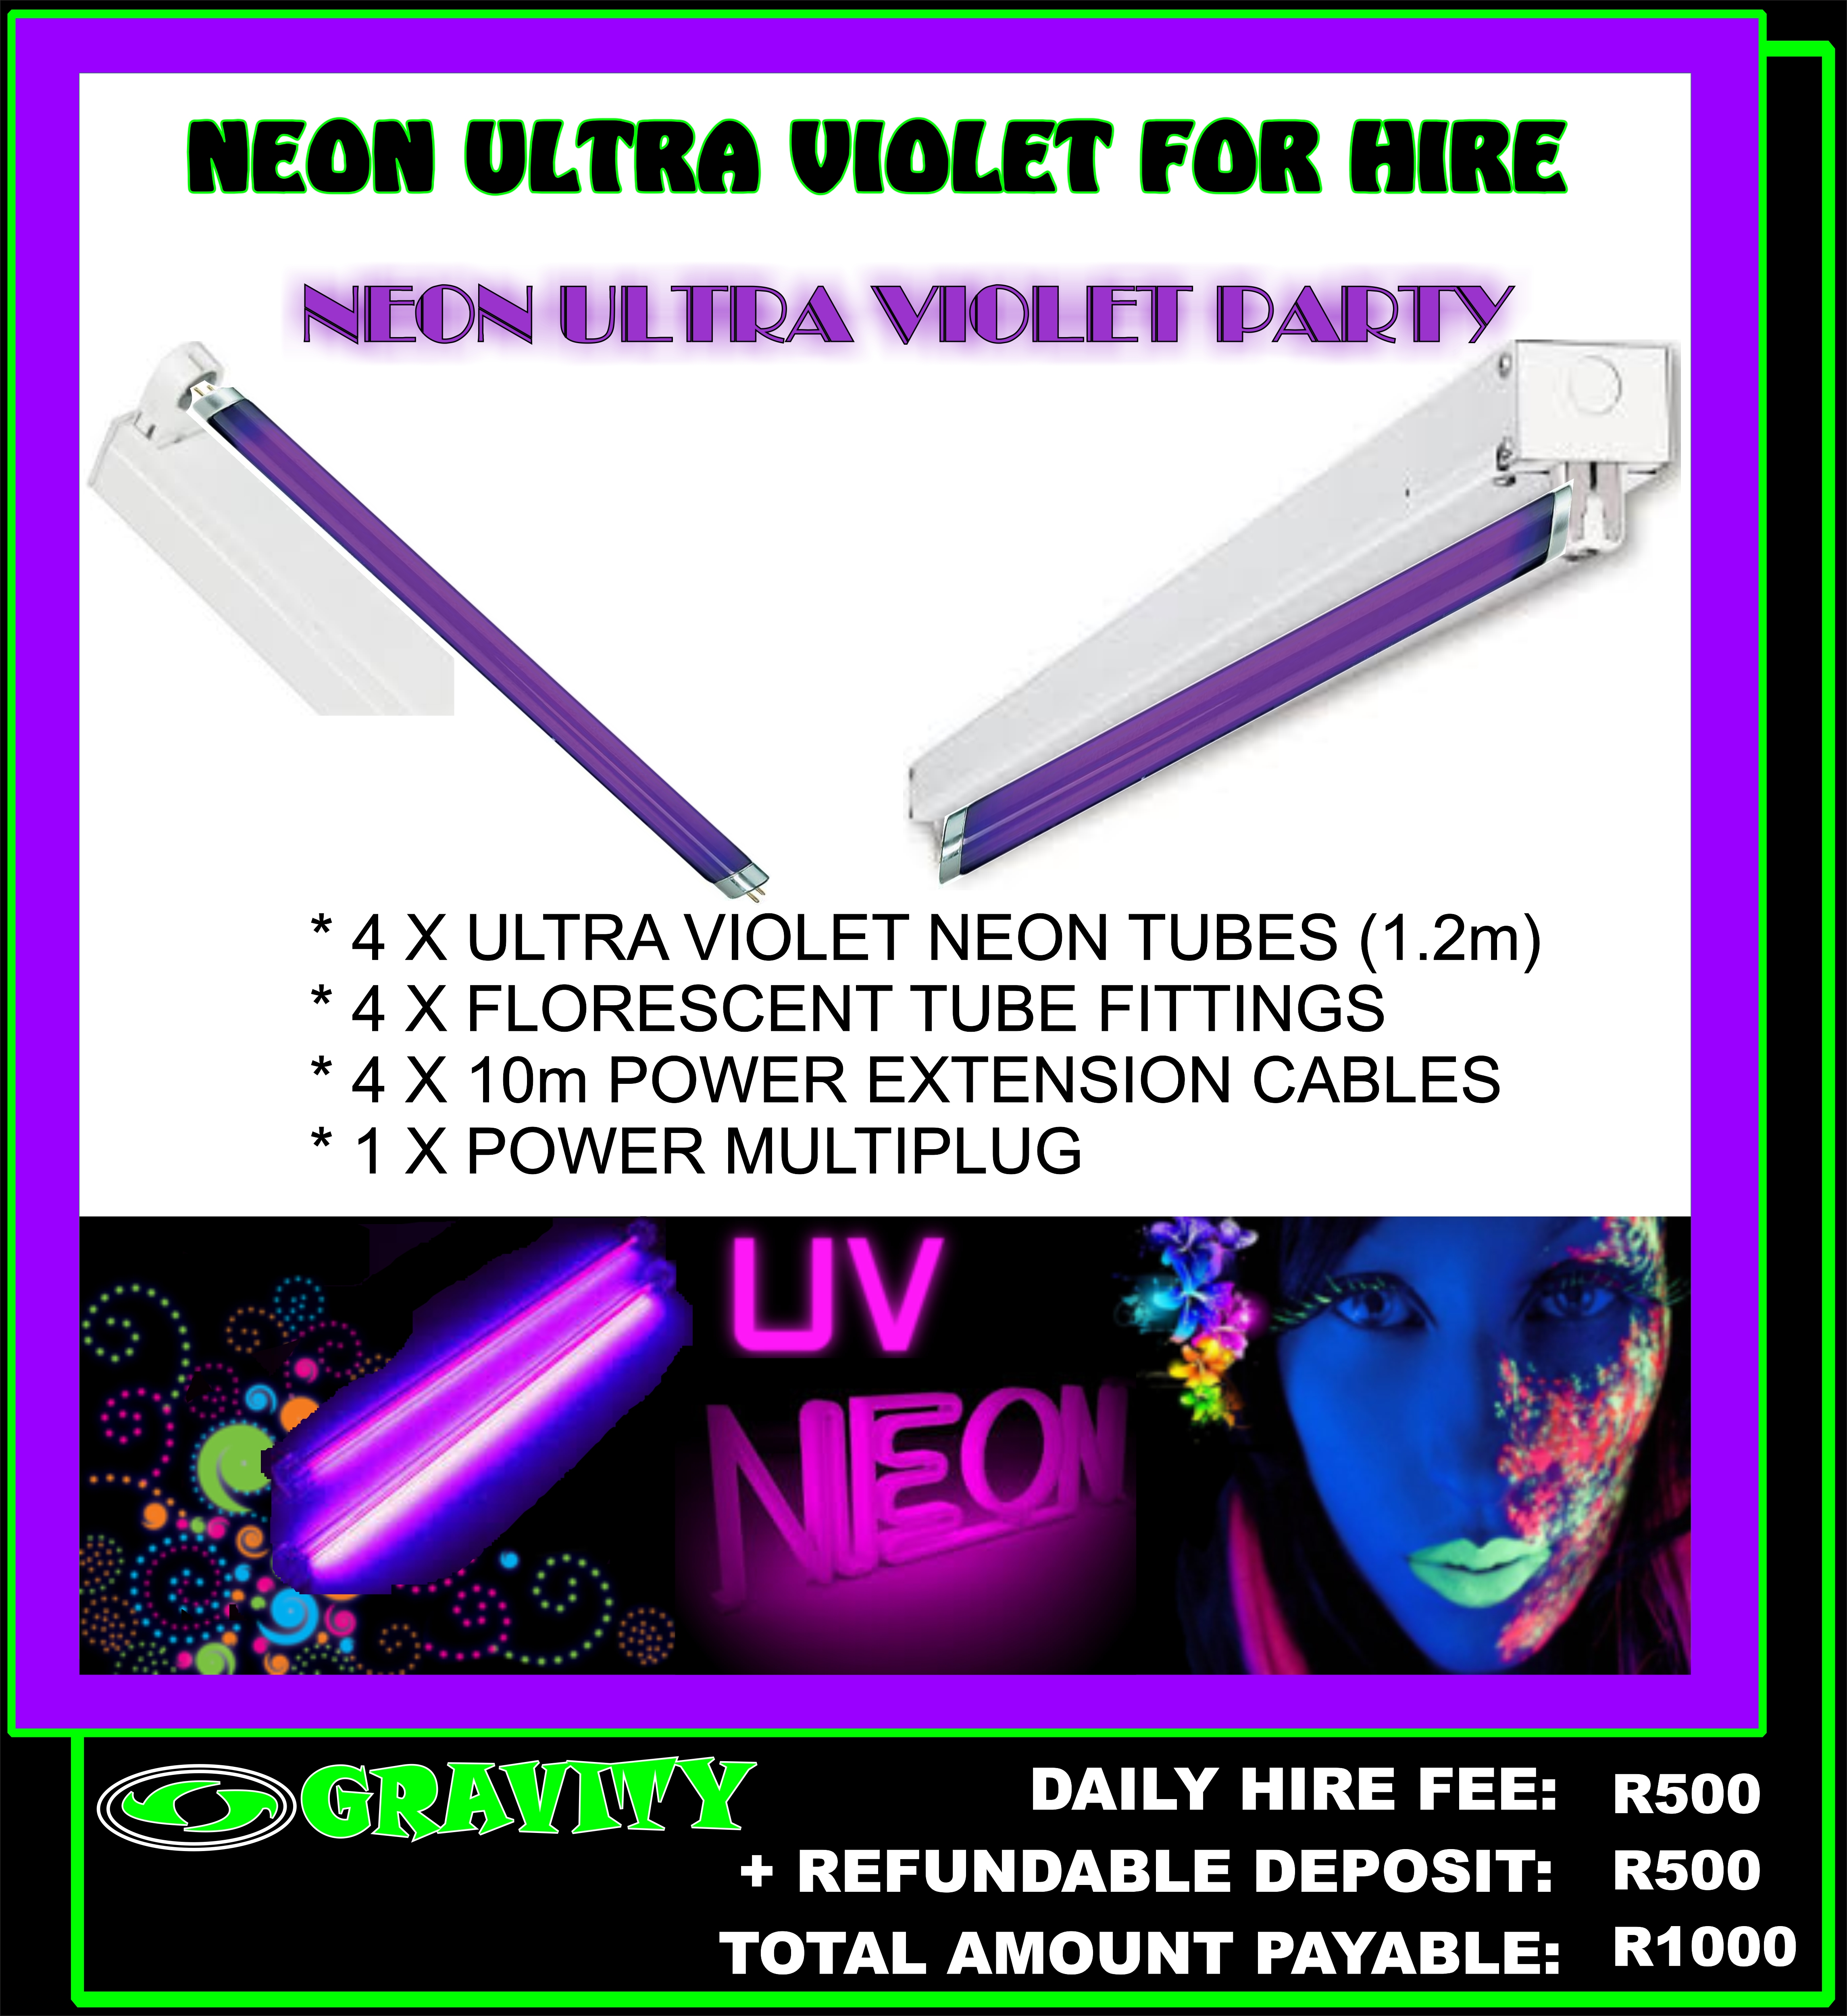 UV PARTY LIGHTING FOR HIRE GRAVITY DJ STORE DURBAN 0315072736 ULTRA VIOLET NEON DISCO PARTY LIGHT HRE DURBAN 0315072463 0315072736 GRAVITY NEON LIGHT HIRE GRAVITY DJ STORE HIRE FOR ULTRA VIOLET LIGHTS IN SOUTH AFRICA DURBAN 0315072463